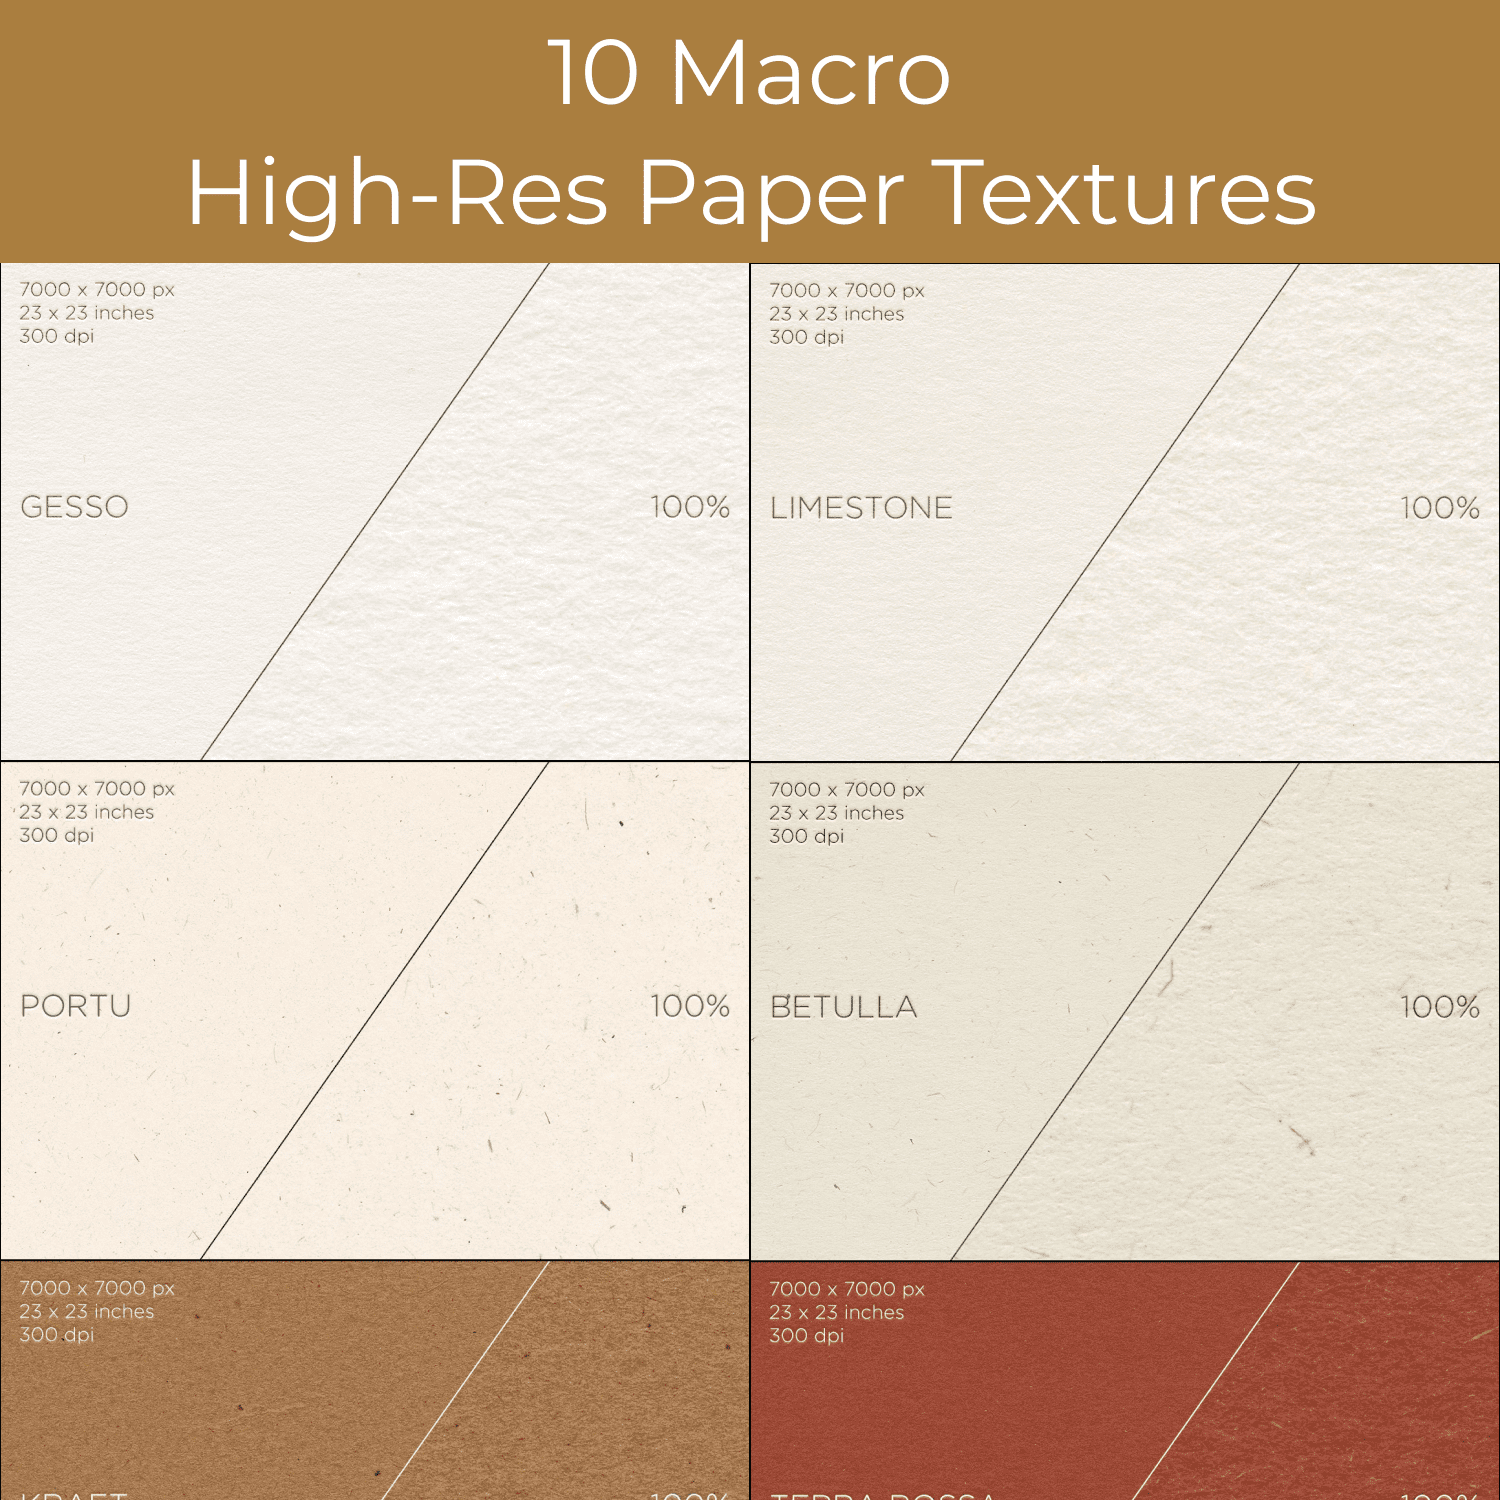 10 Macro High-Res Paper Textures cover.